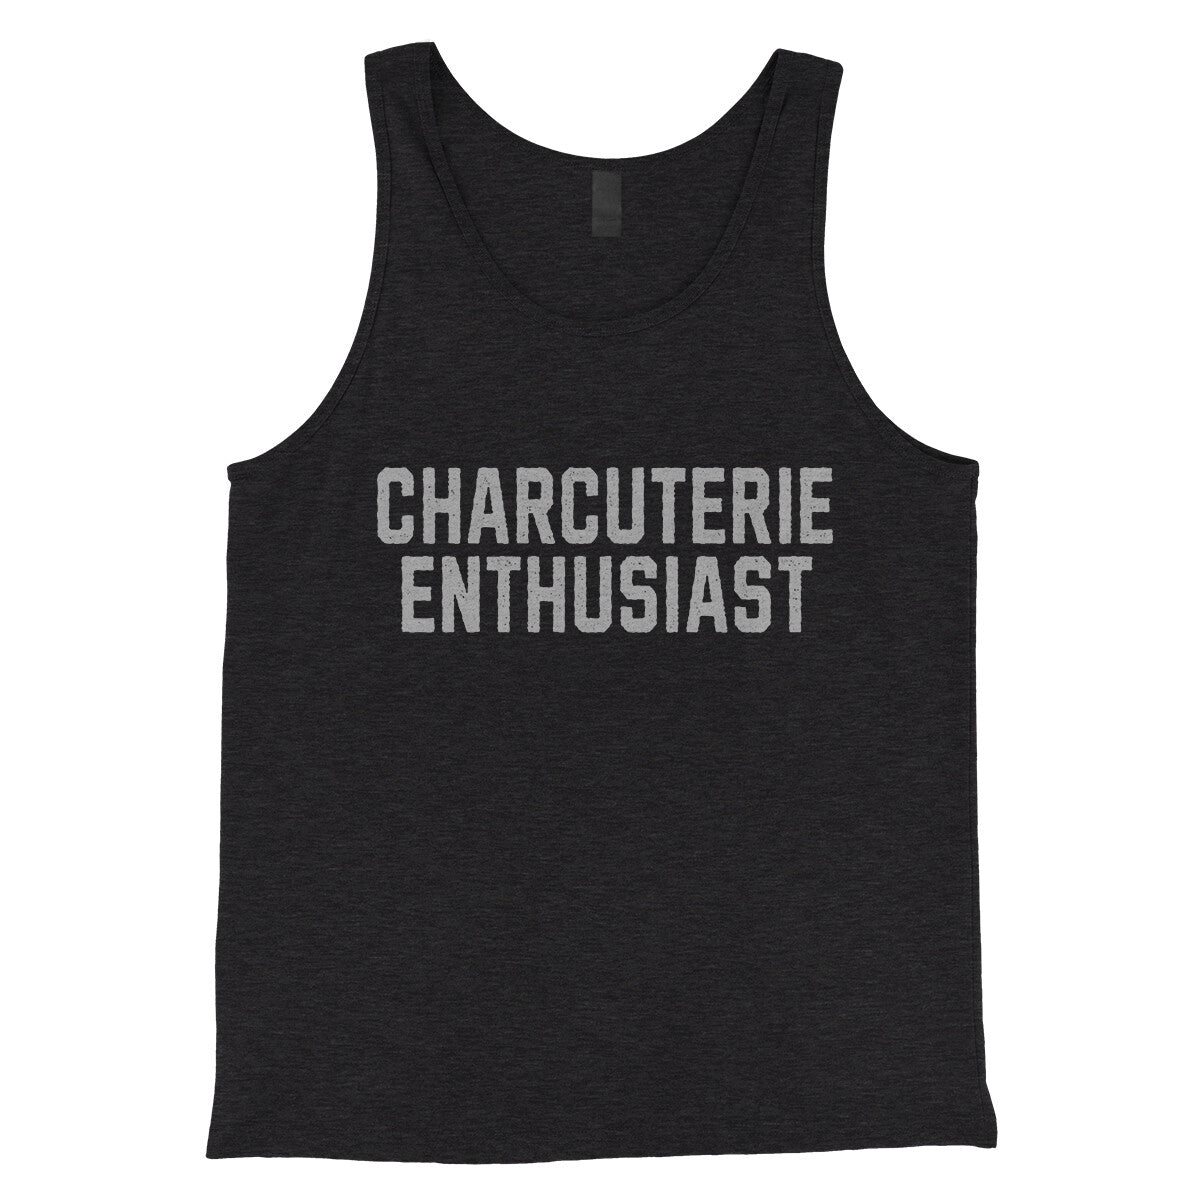 Charcuterie Enthusiast in Charcoal Black TriBlend Color